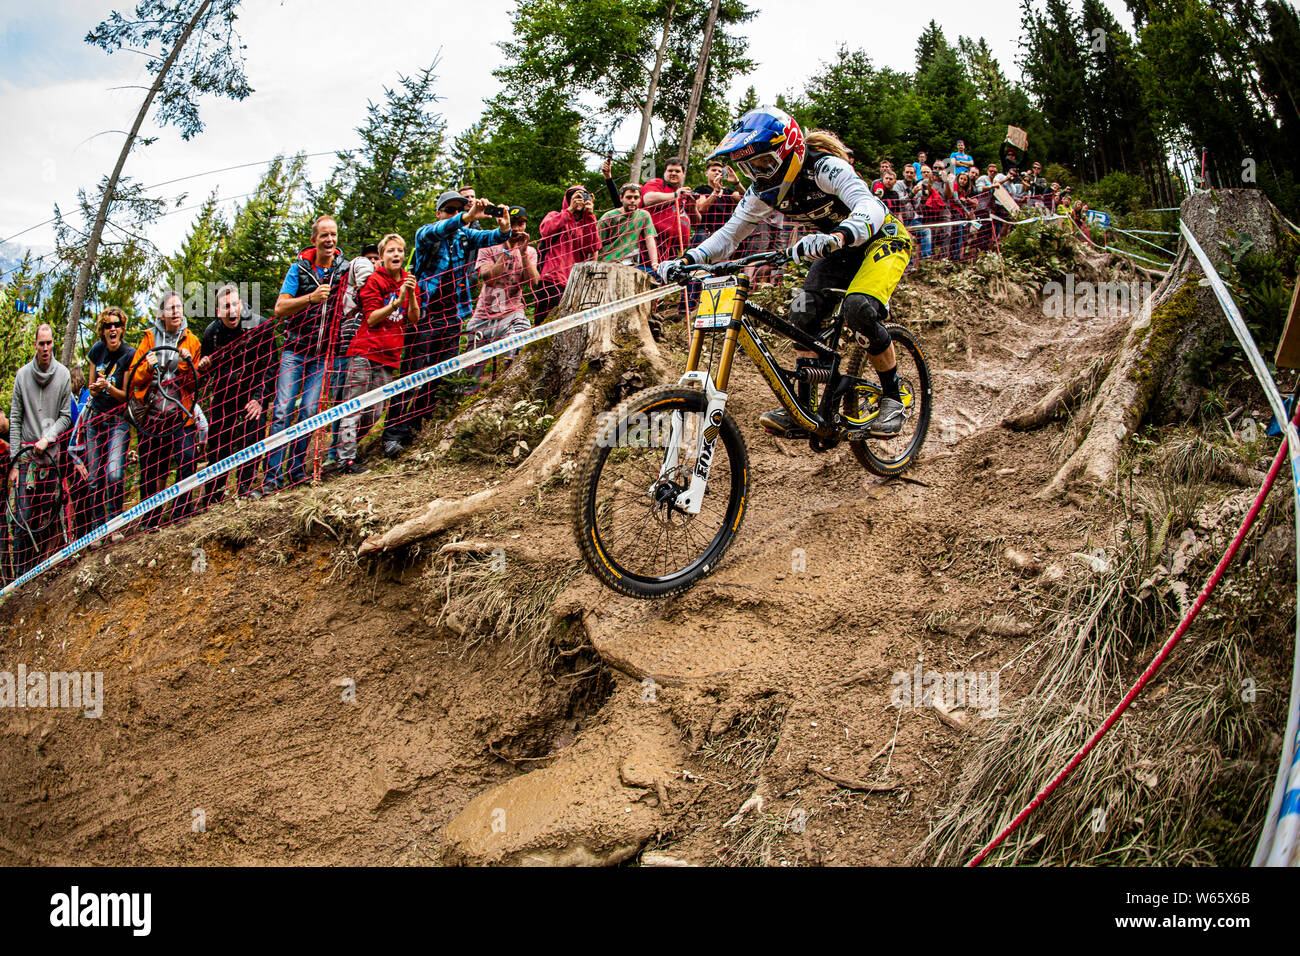 SEPTEMBER 22, 2013 - LEOGANG, AUSTRIA. Rachel Atherton (GBR) racing at the UCI Mountain Bike Downhill World Cup. Stock Photo